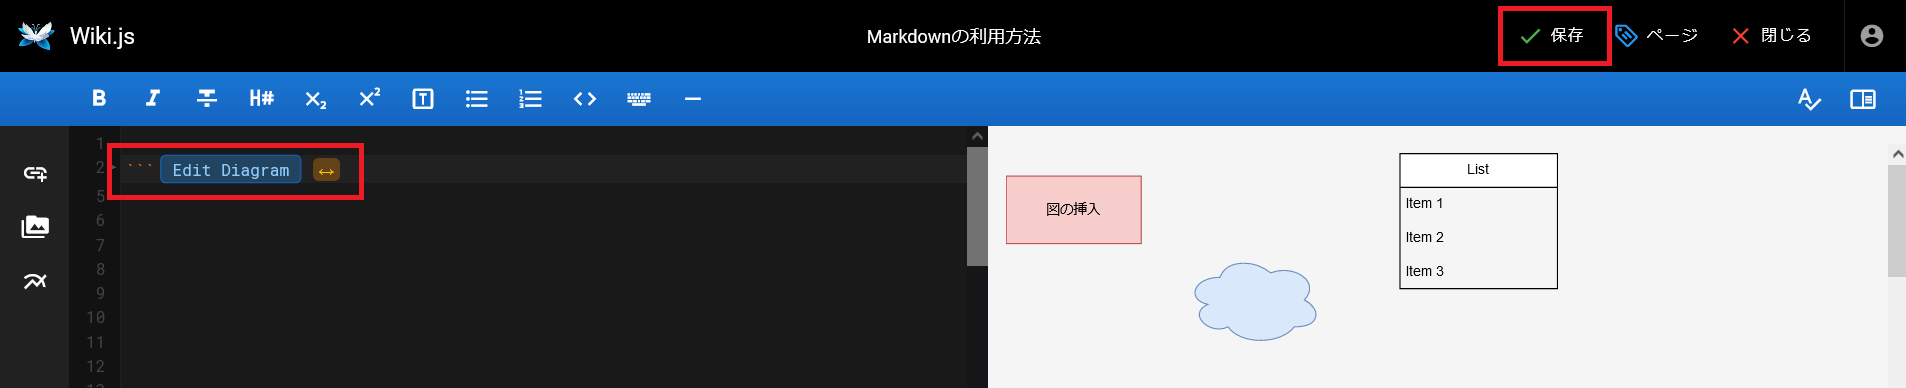 Wiki.jsの画像管理インタフェース